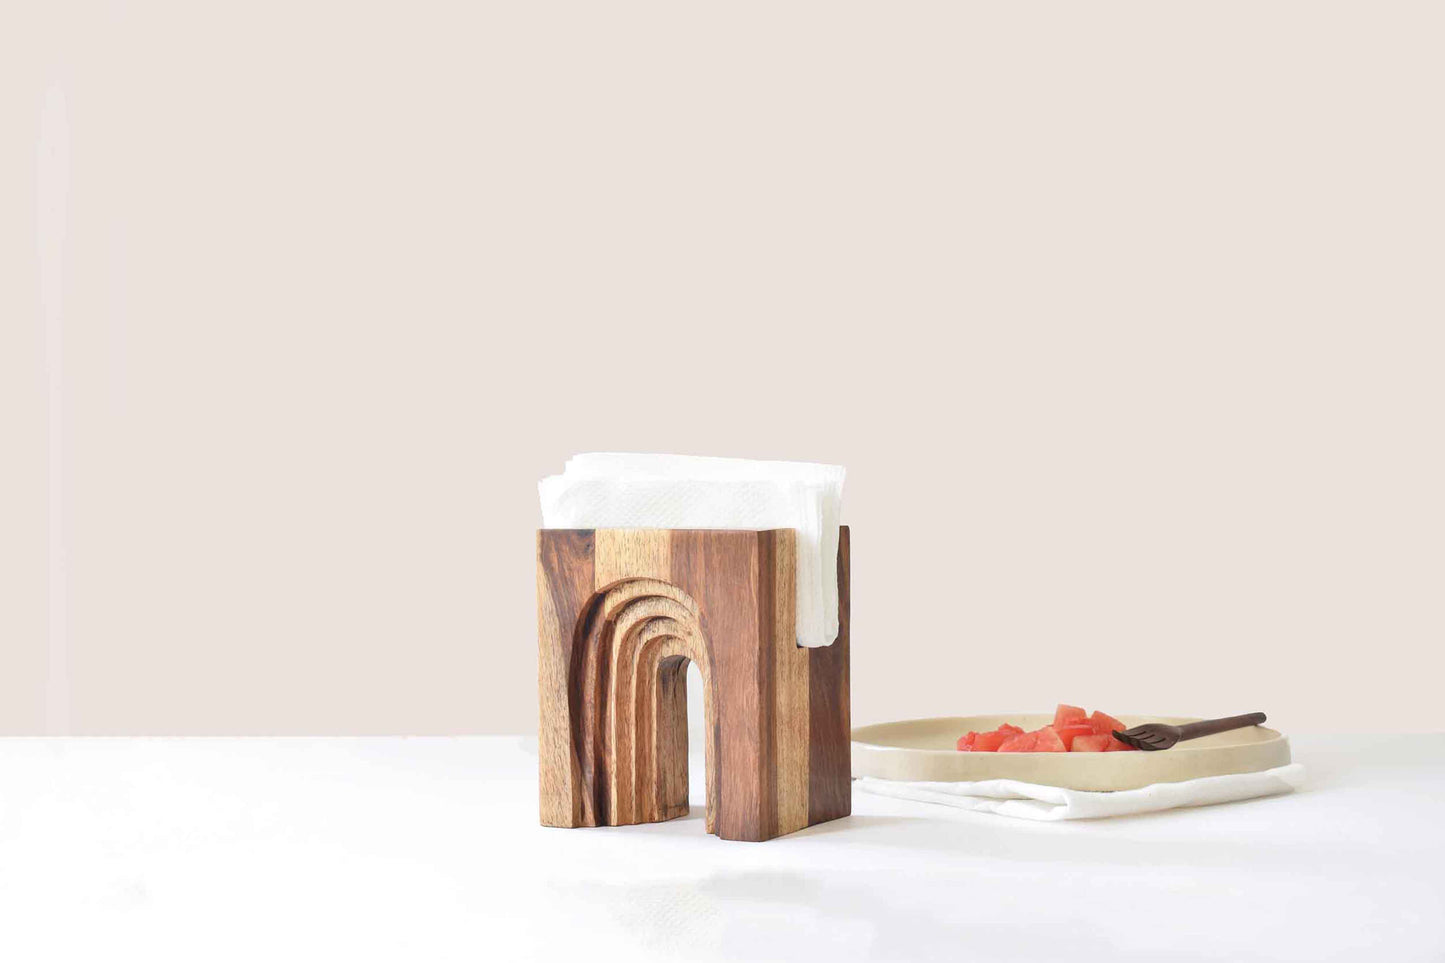 Wooden napkin holder inspired by architecture